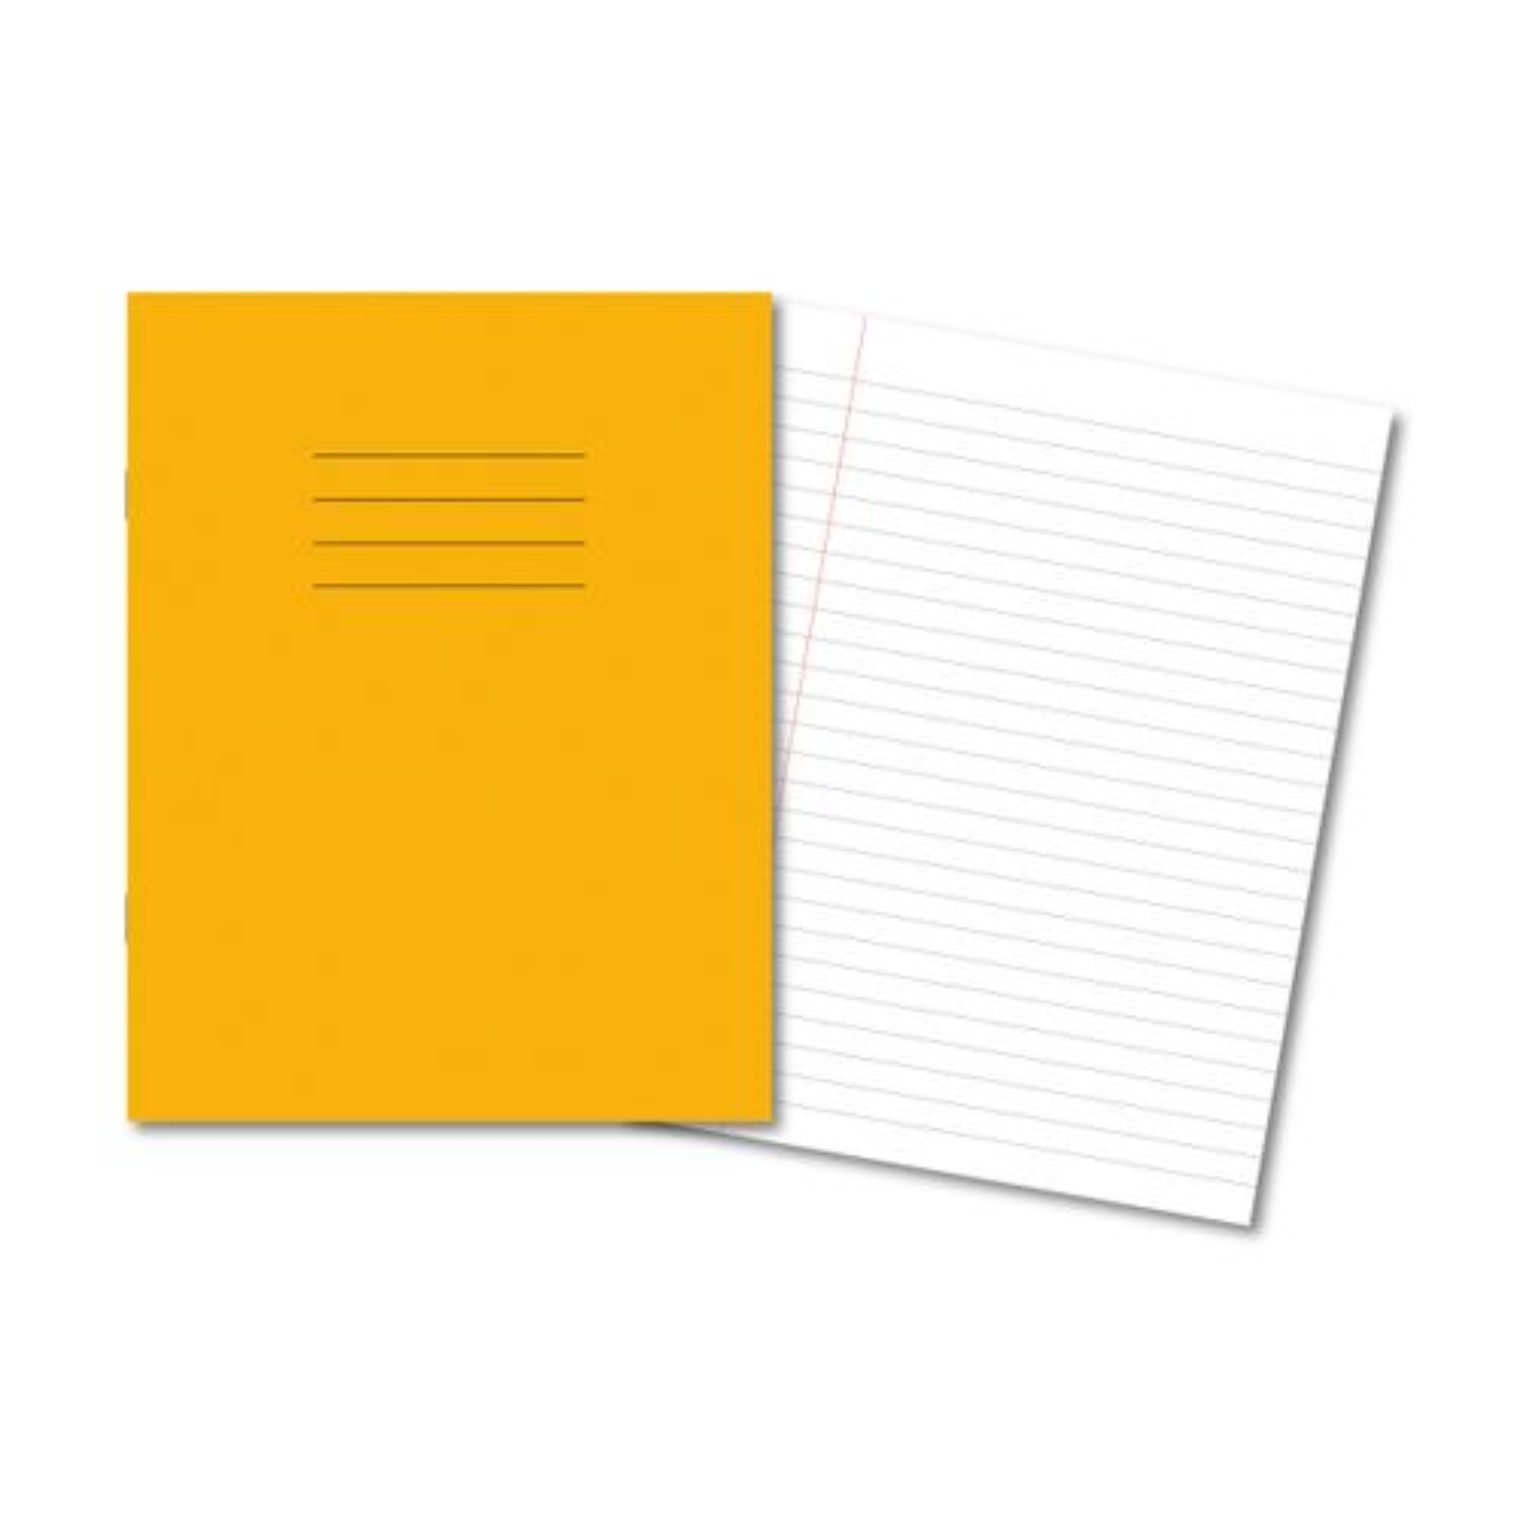 Exercise Book A4 8mm Ruled and Margin Yellow